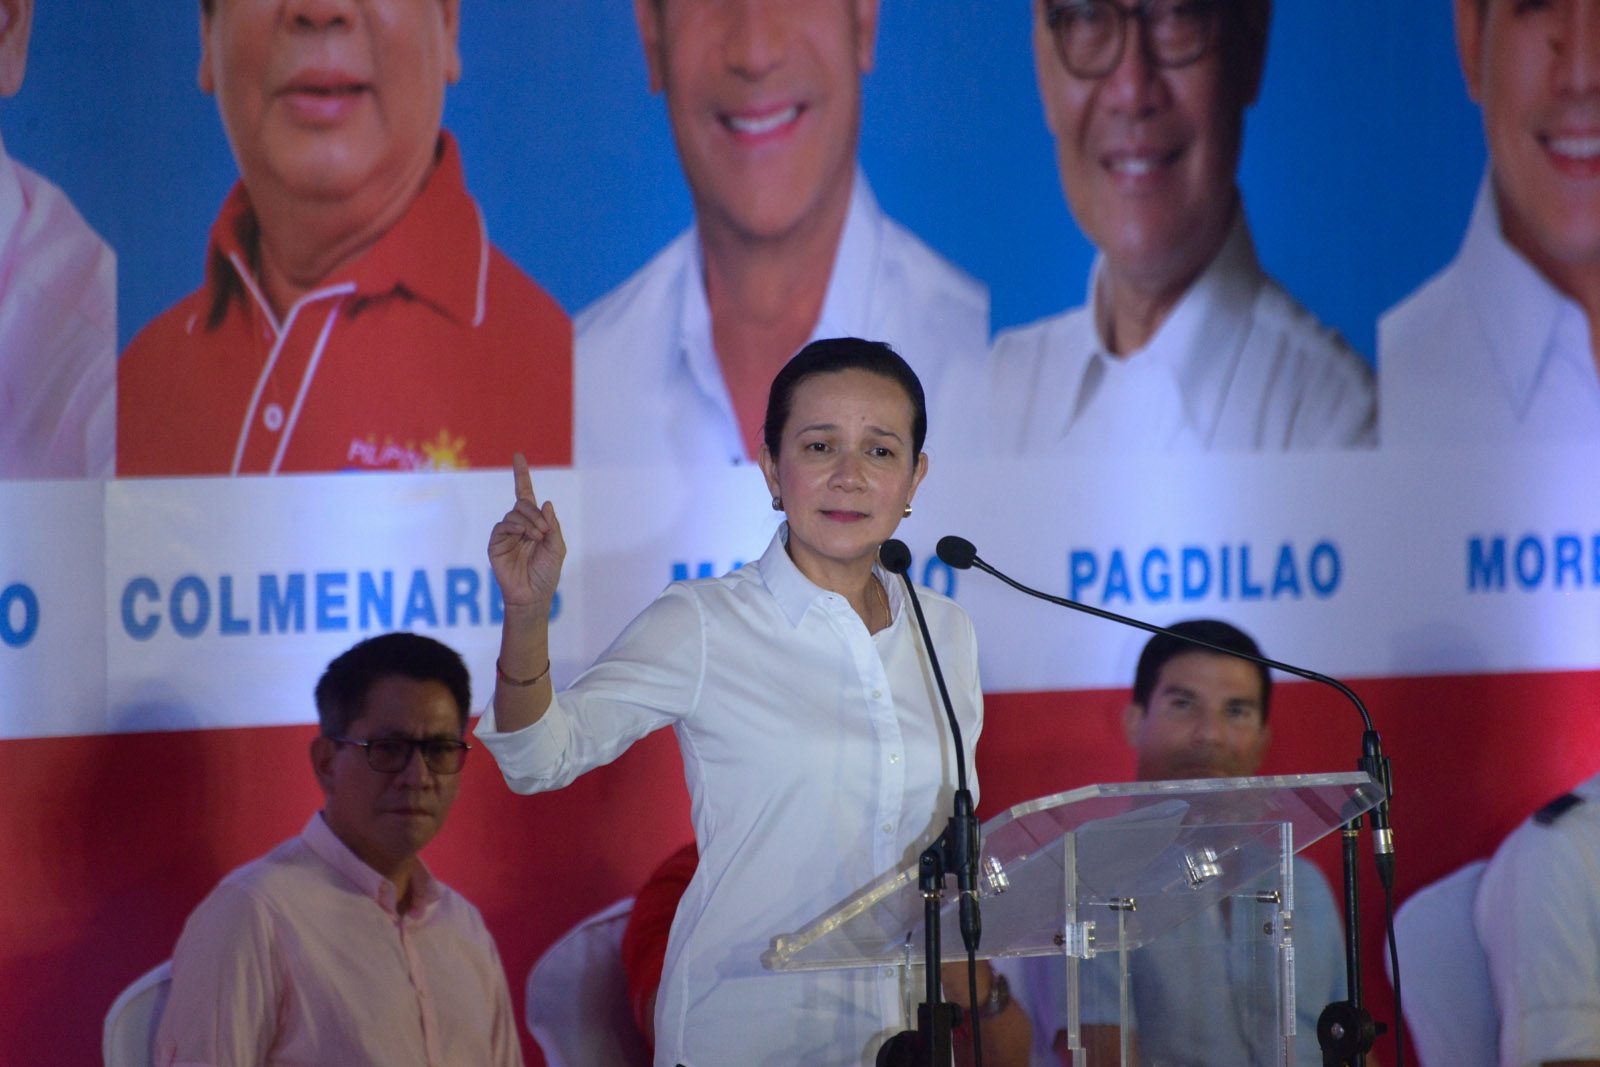 Grace Poe: I’m disappointed, but fight is far from over